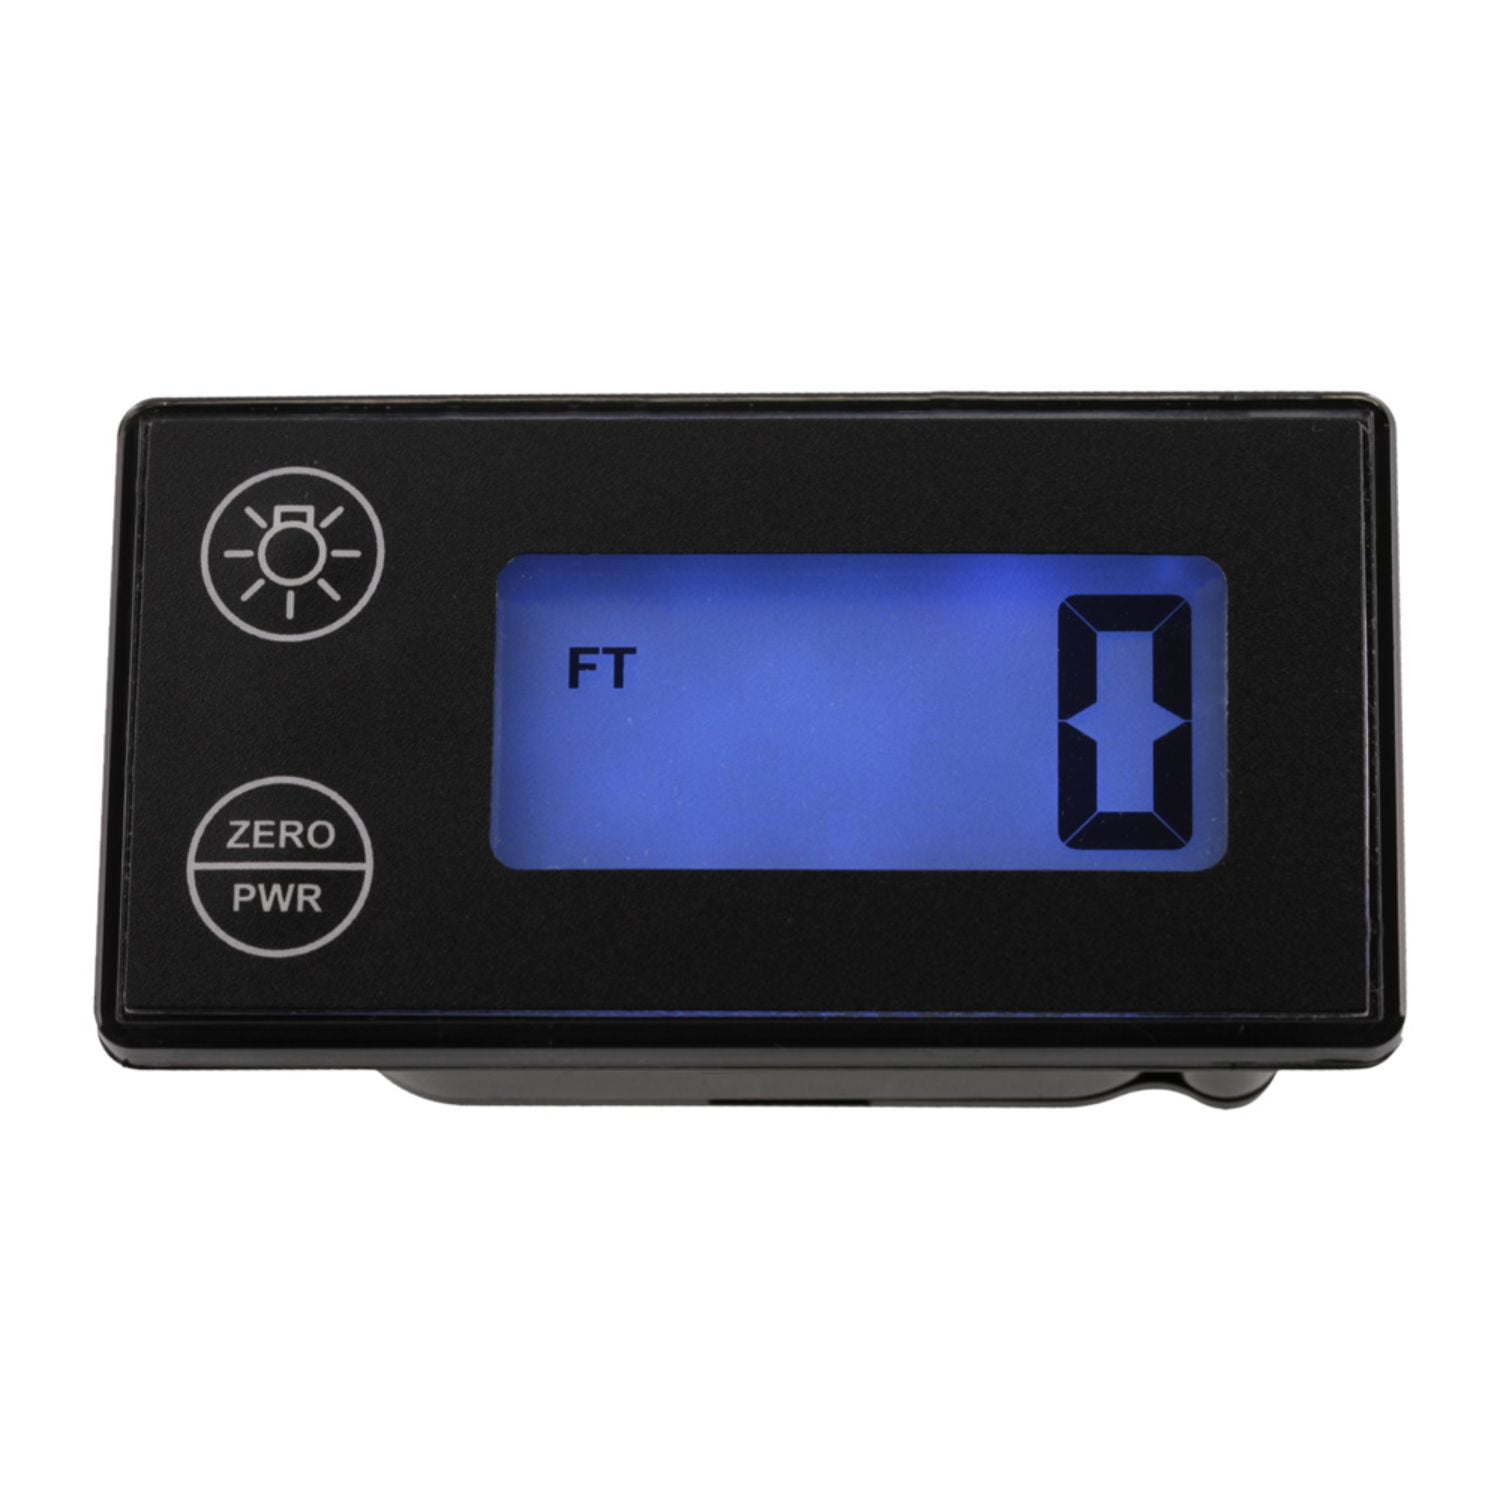 Scotty HP Electric Downrigger Digital Counter